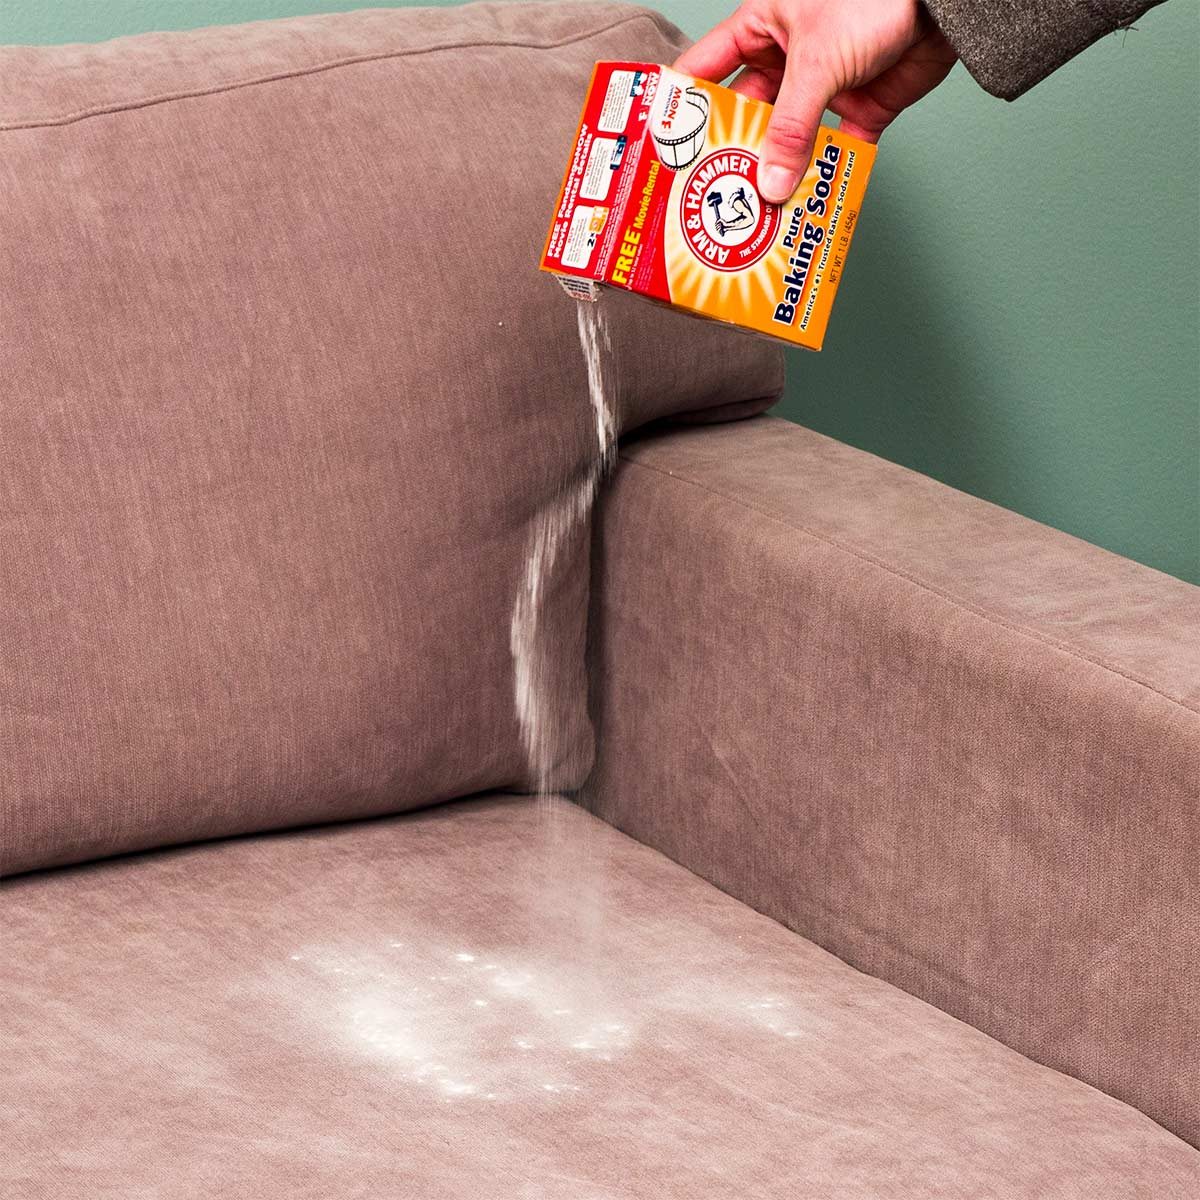 How to Clean Sofa at Home?